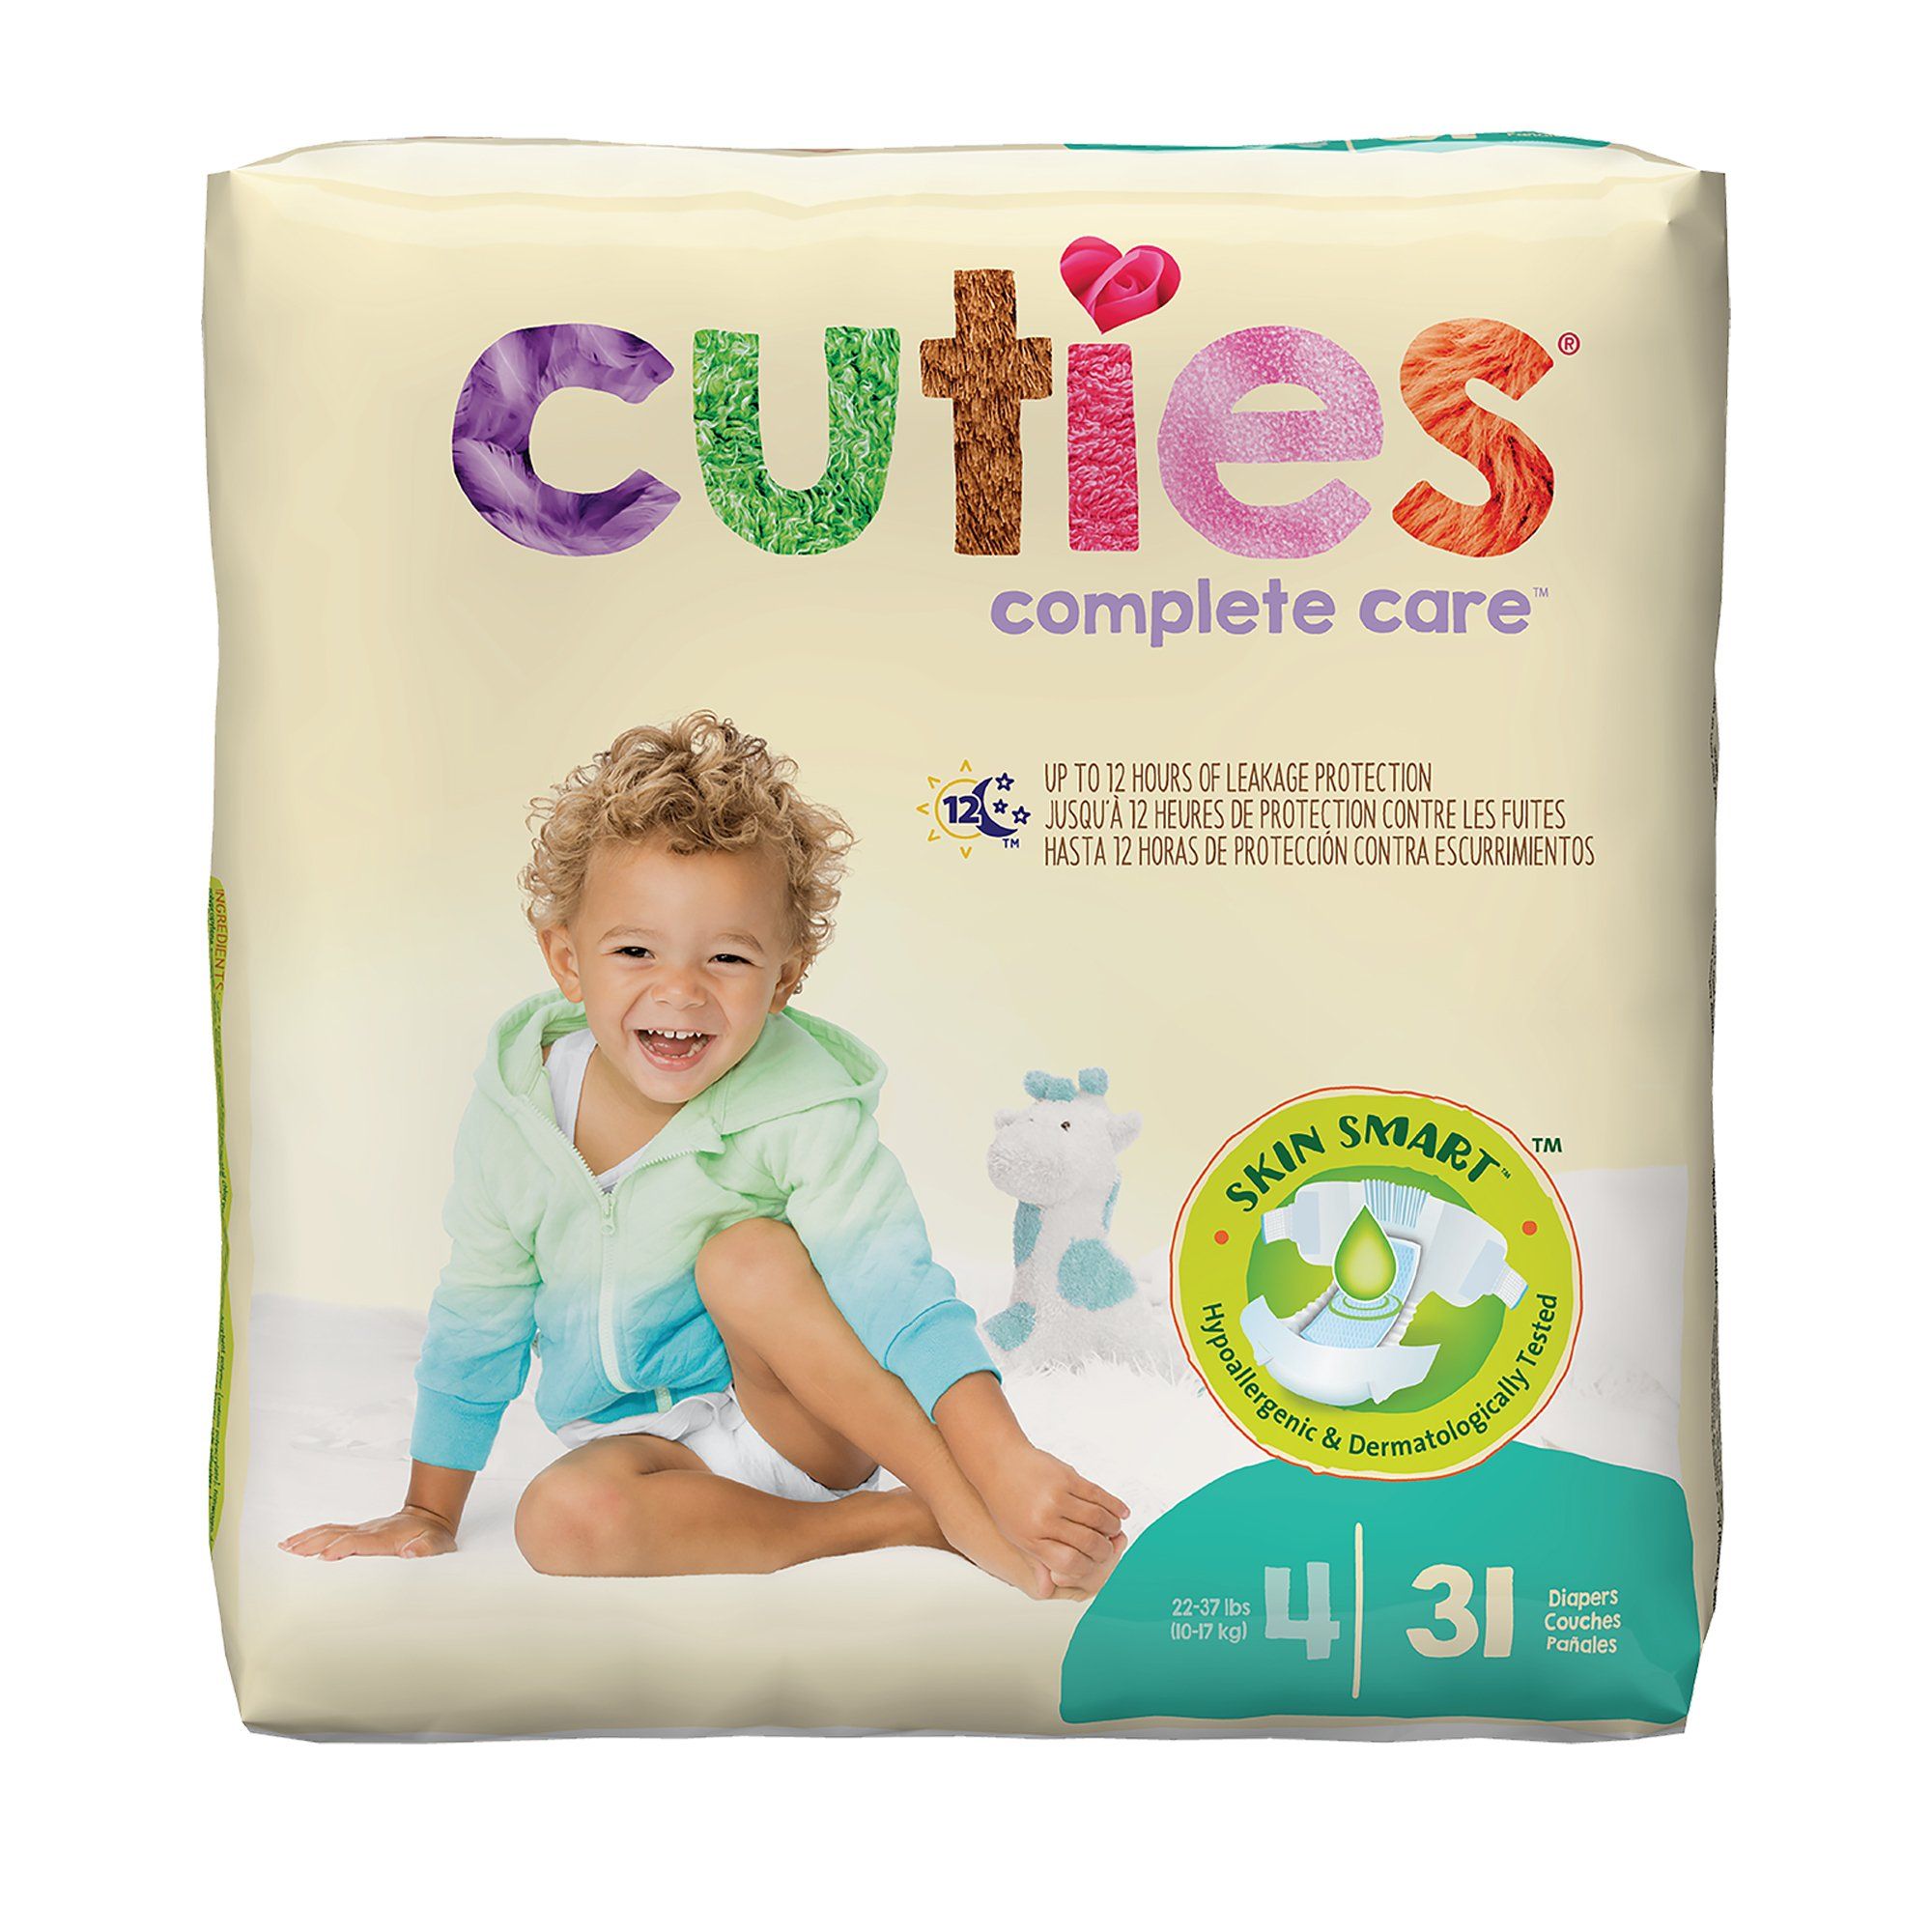 Cuties Complete Care Baby Diapers, Size 4, 22 - 37 lbs - 31 ct